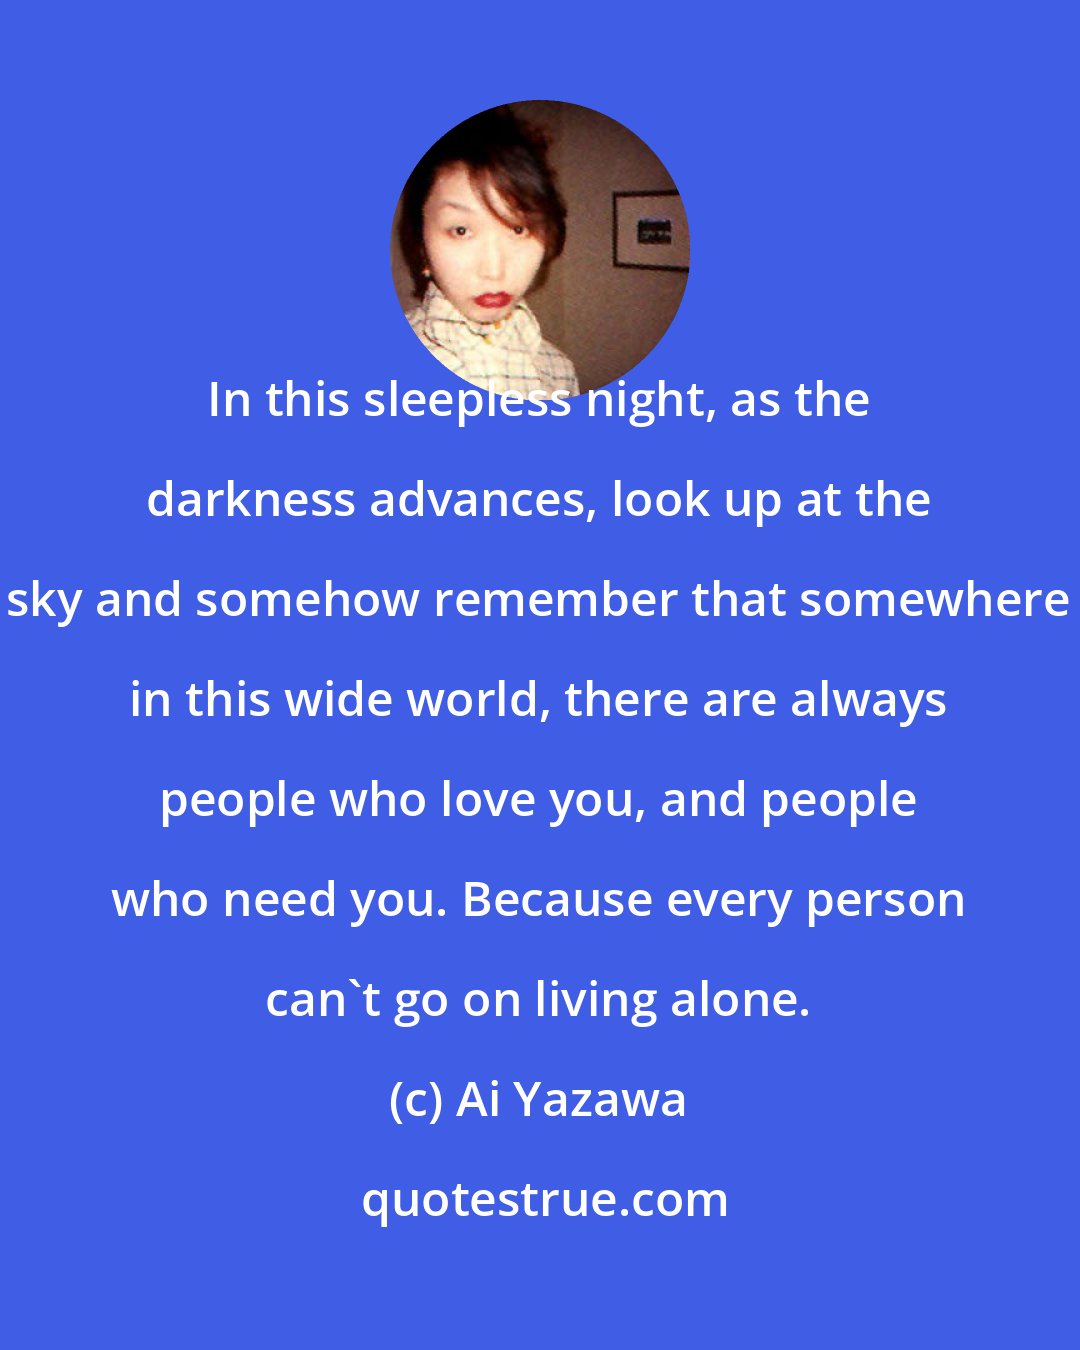 Ai Yazawa: In this sleepless night, as the darkness advances, look up at the sky and somehow remember that somewhere in this wide world, there are always people who love you, and people who need you. Because every person can't go on living alone.